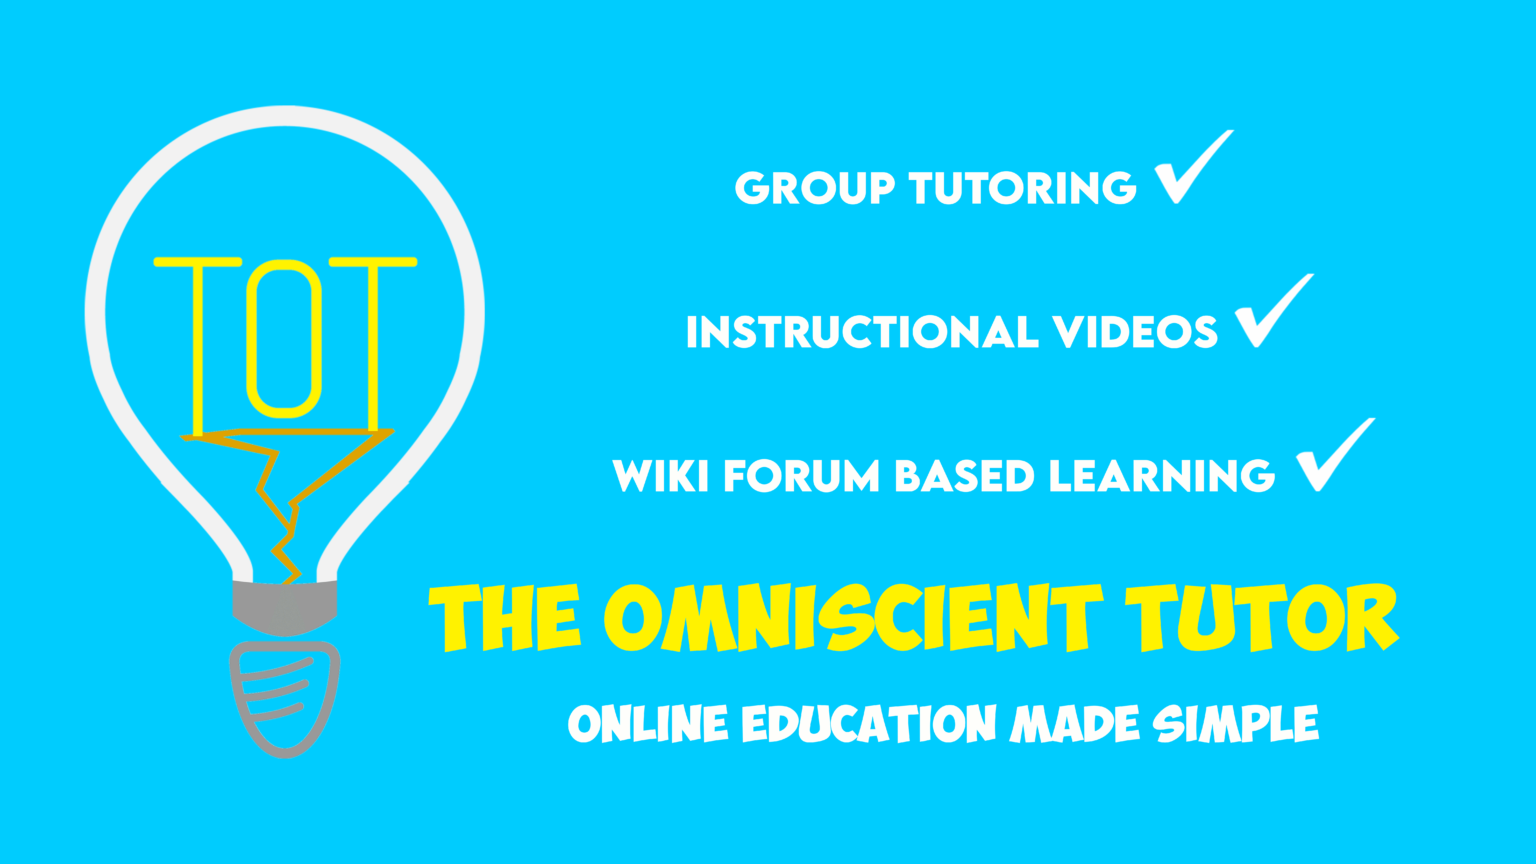 The omniscient tutor organization blue and white infographic 